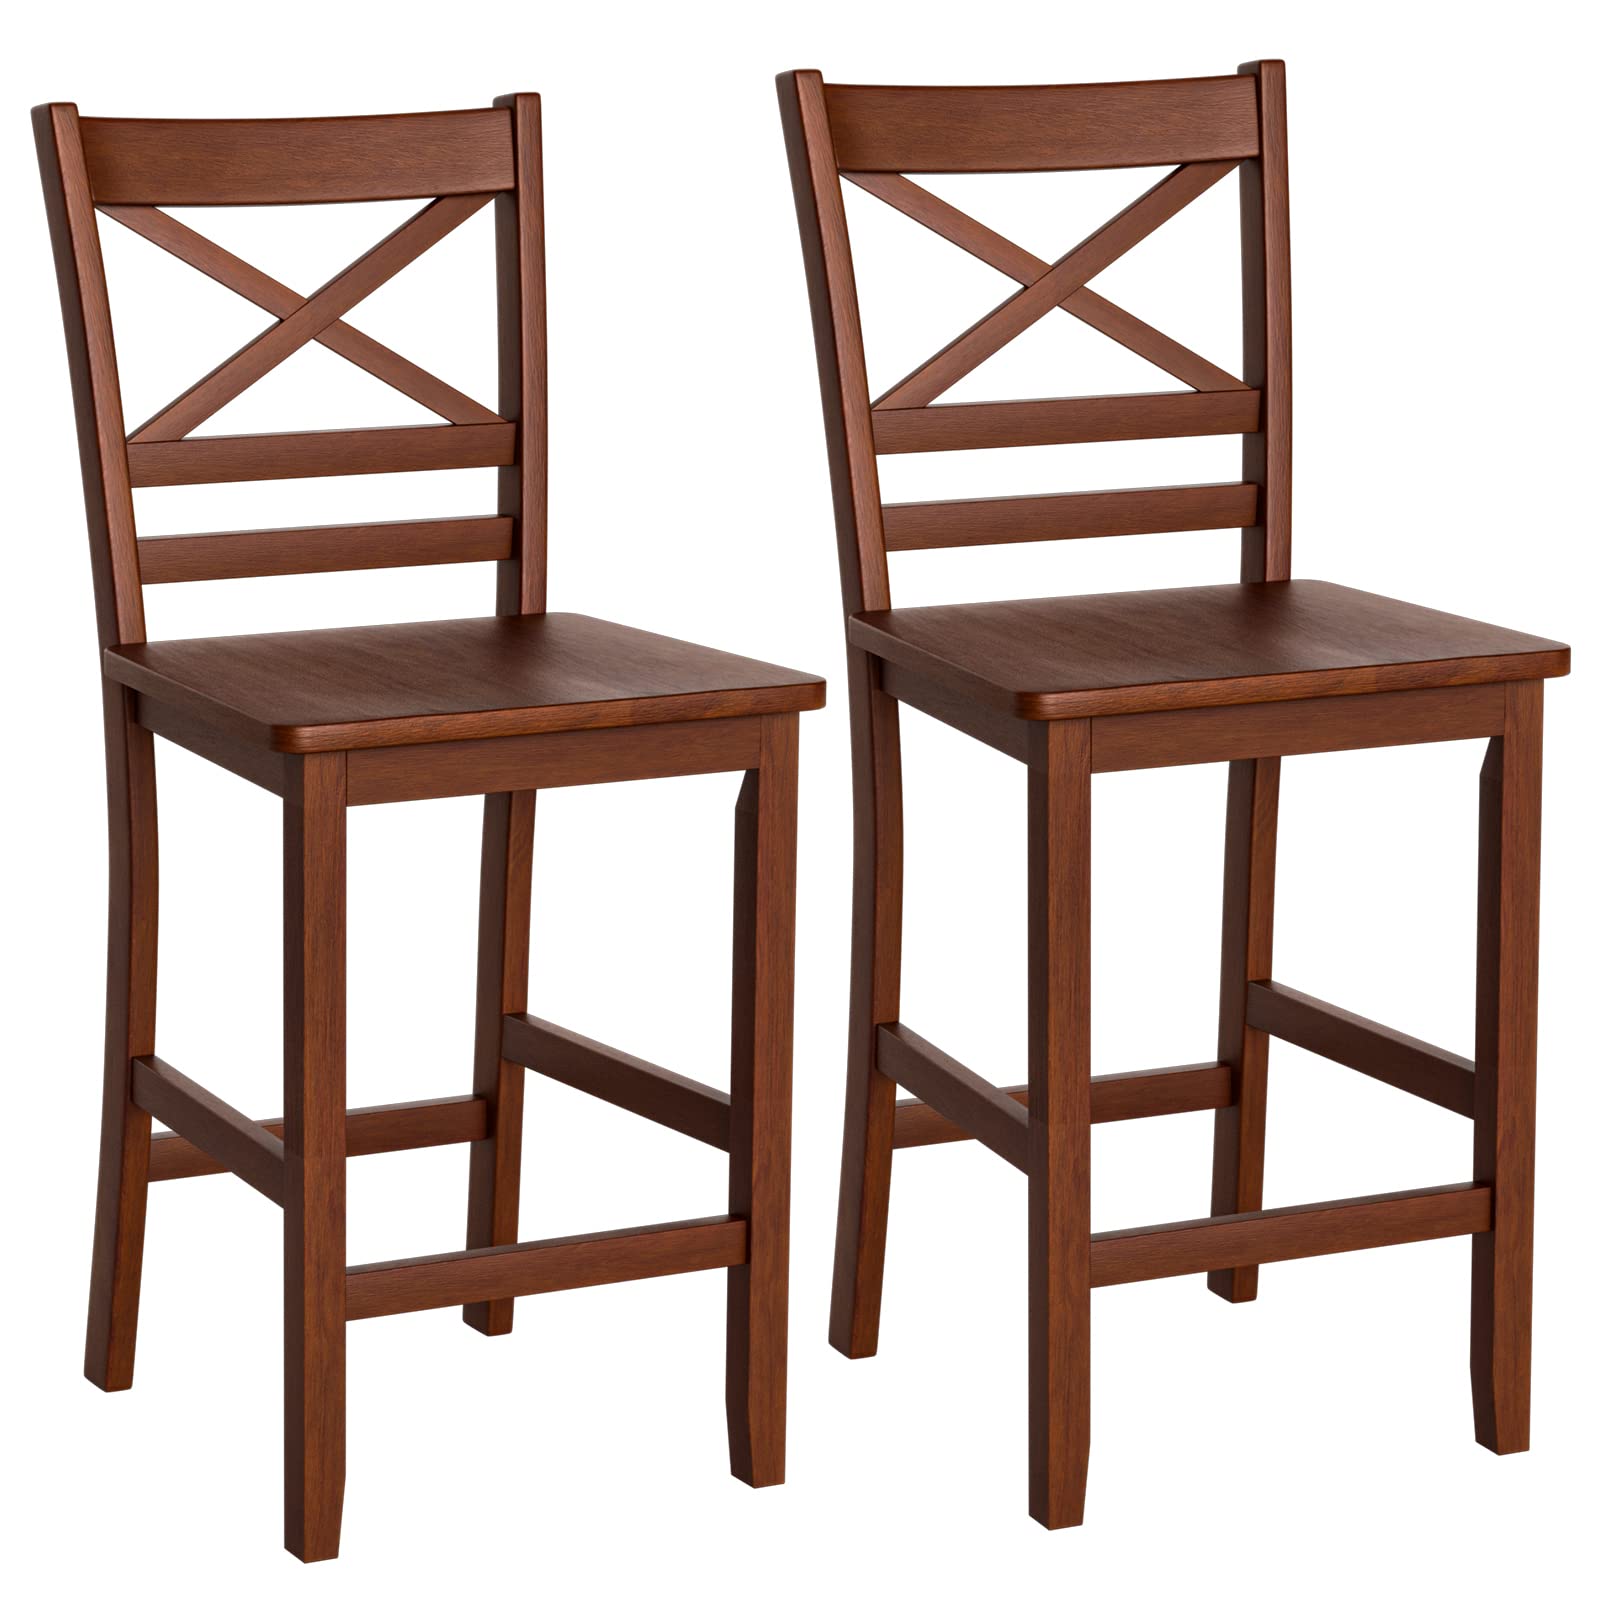 Giantex 25'' Antique Kitchen Counter Height Chairs with Wooden X-Shaped Backrest & Rubber Wood Legs